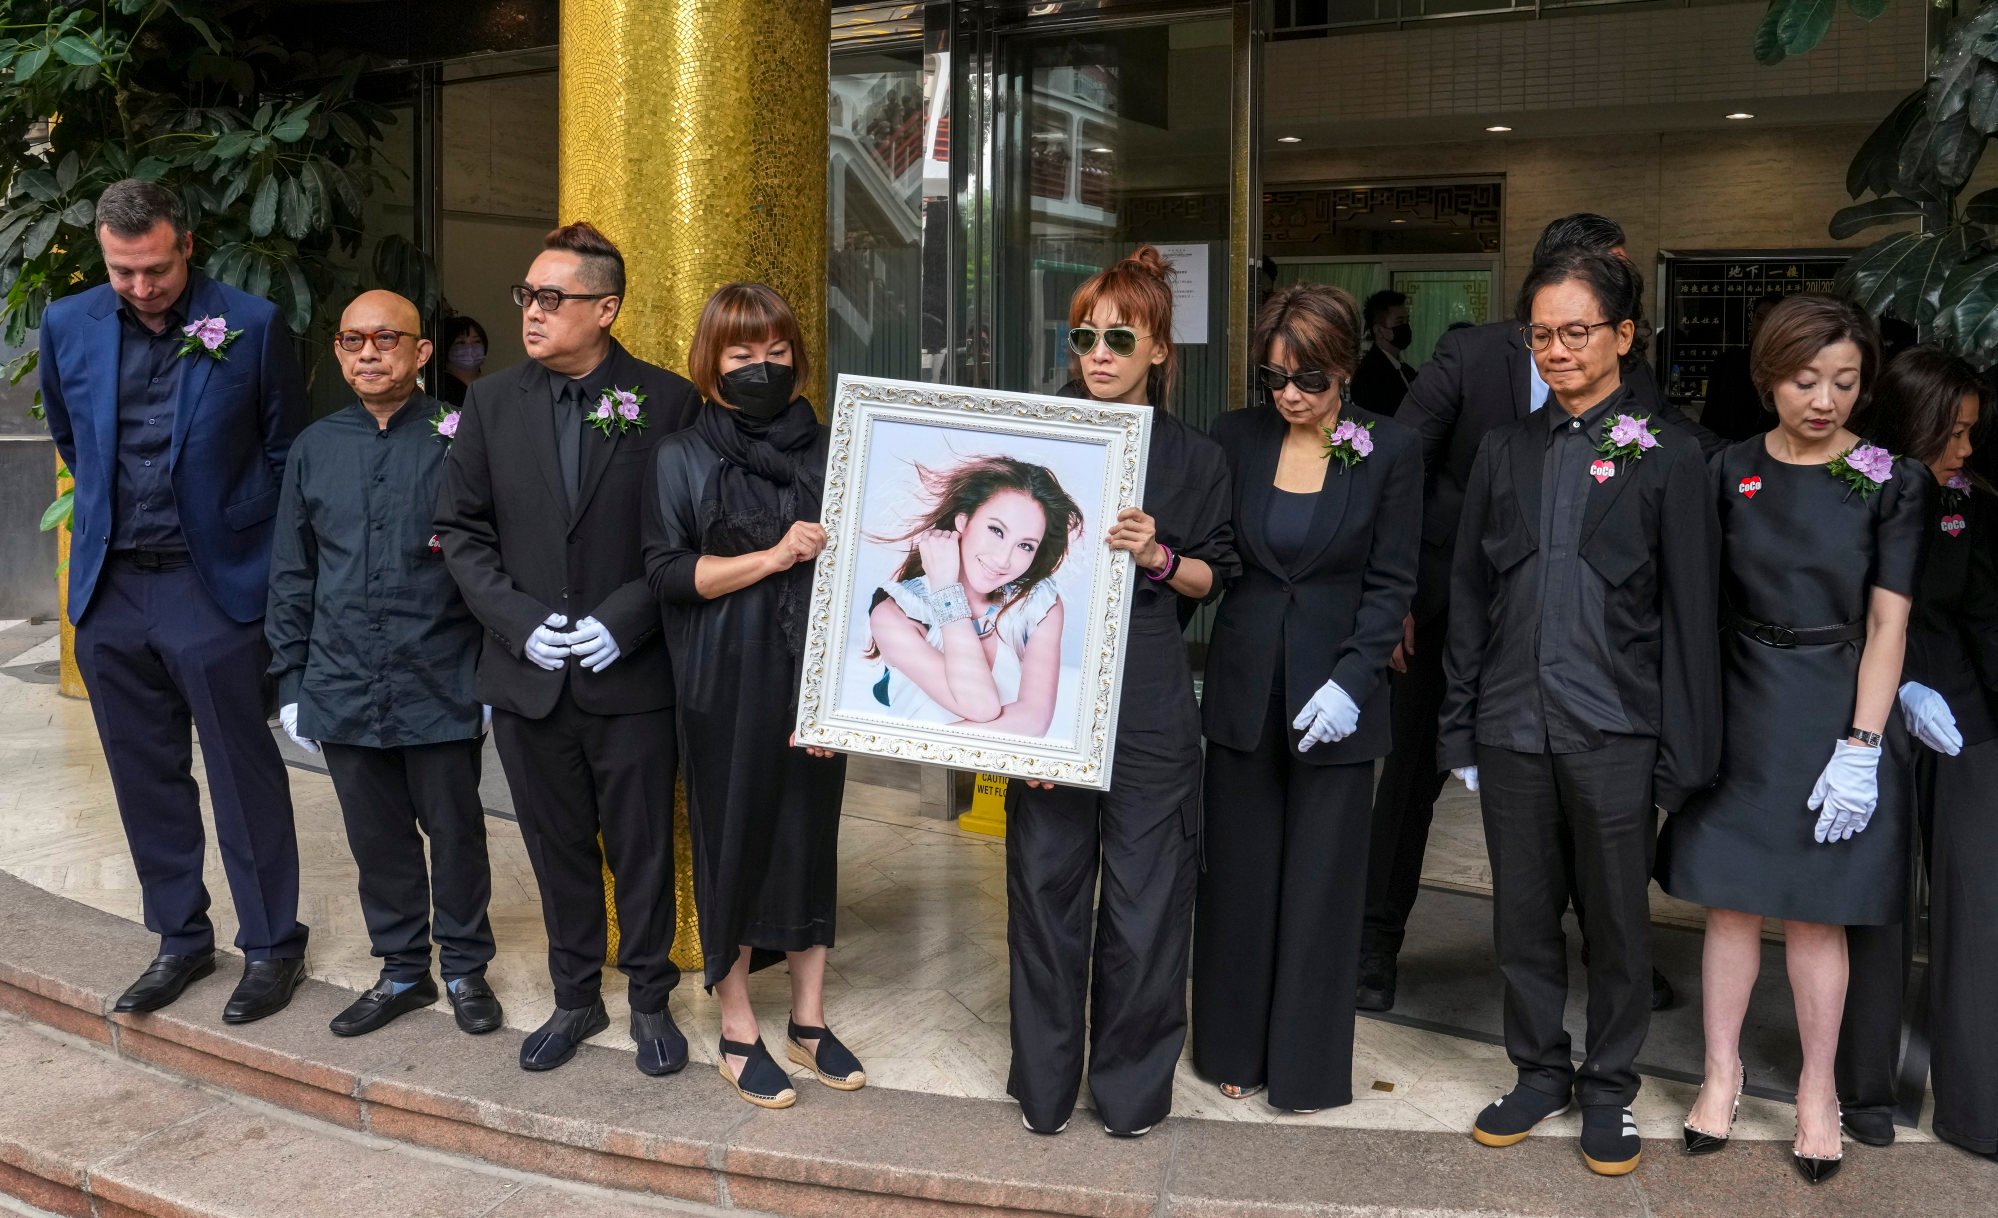 Family members and friends (left to right) Jonathan Serbin, Roger Li, Billy Ho, Carol Lee, Nancy Lee, Jenny Tseng, Chien Yao and Lily Pang leave a service for the late Coco Lee. Photo: Elson Li